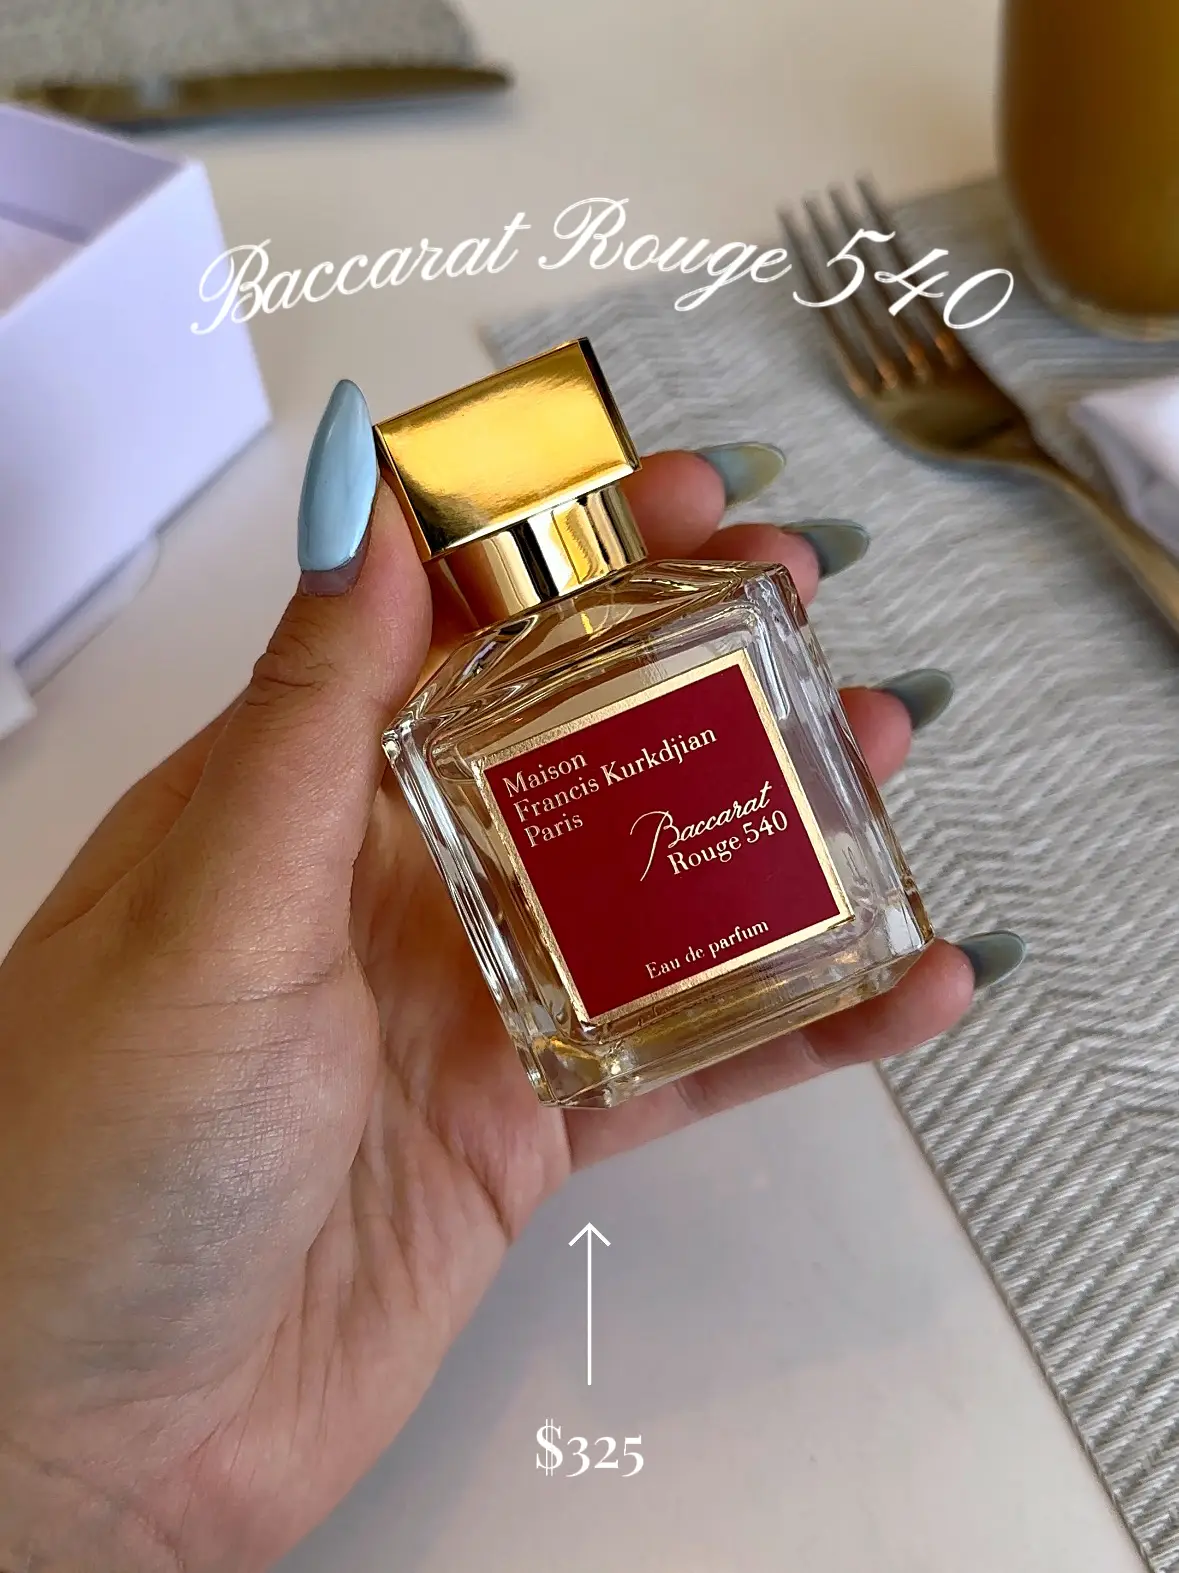 Is Baccarat Rouge Worth It? My Review Of This Luxury Perfume